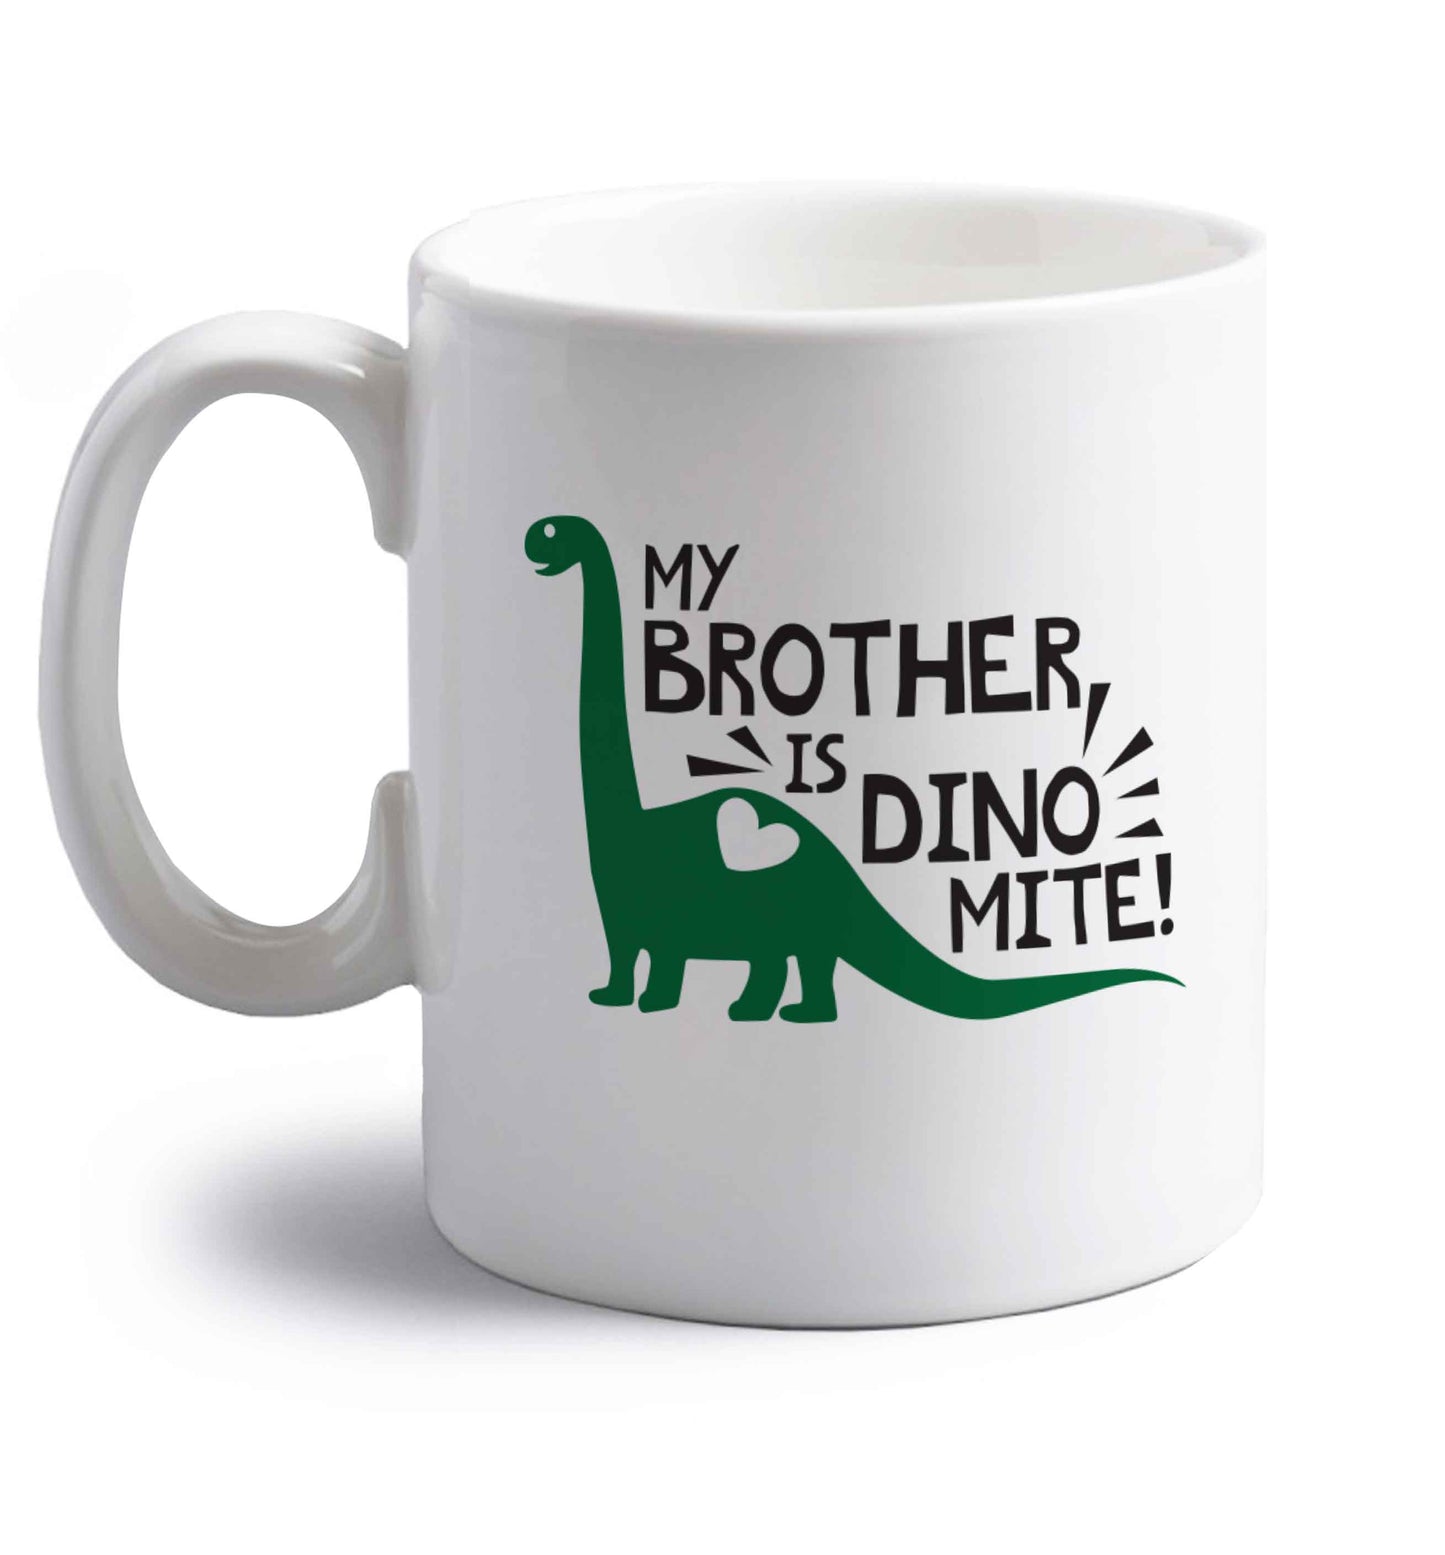 My brother is dinomite! right handed white ceramic mug 